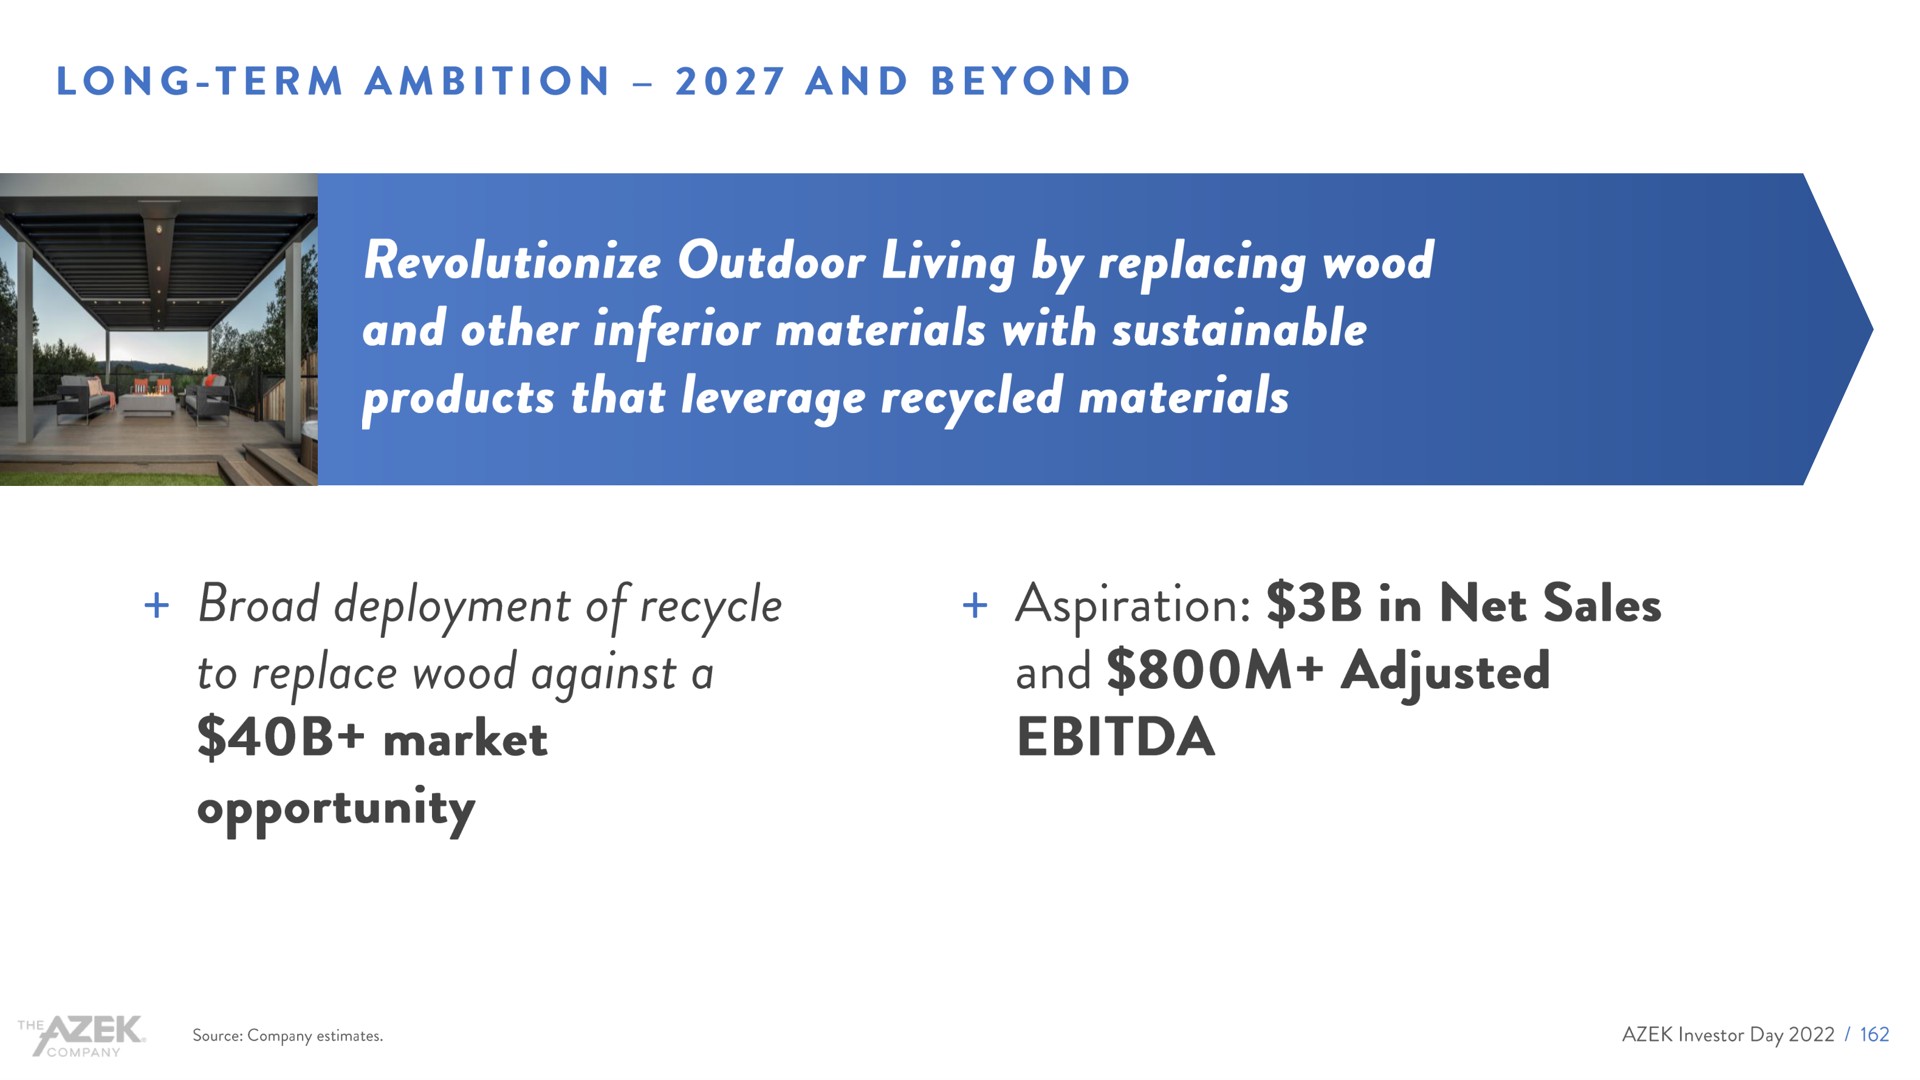 long term ambition and beyond revolutionize outdoor living by replacing wood and other inferior materials with sustainable products that leverage recycled materials broad deployment of recycle to replace wood against a market opportunity aspiration in net sales and adjusted | Azek